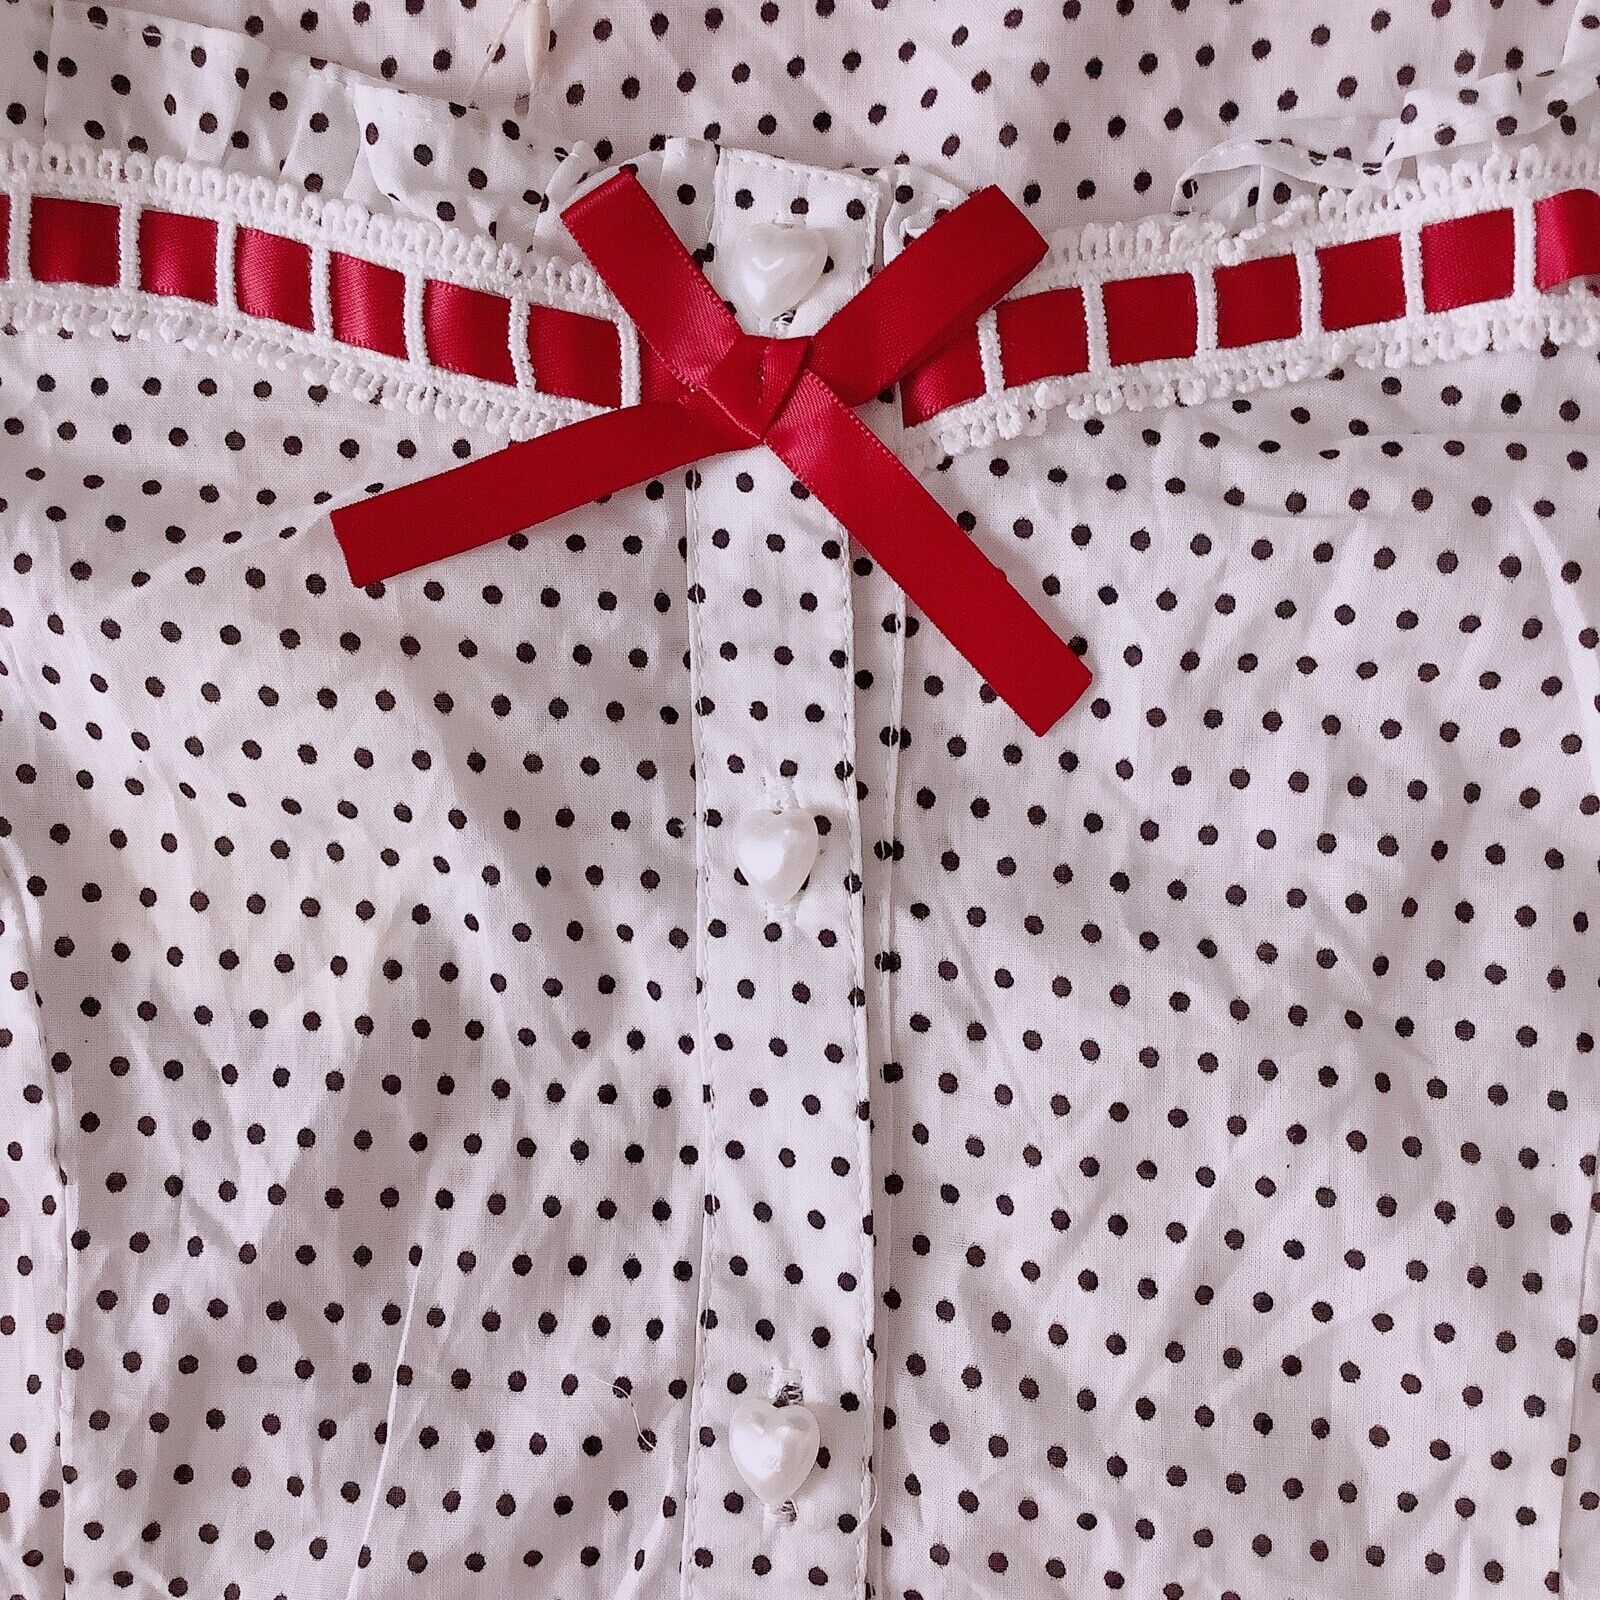 Ank Rouge Polka Dot Ribbon Blouse (White) New with tags